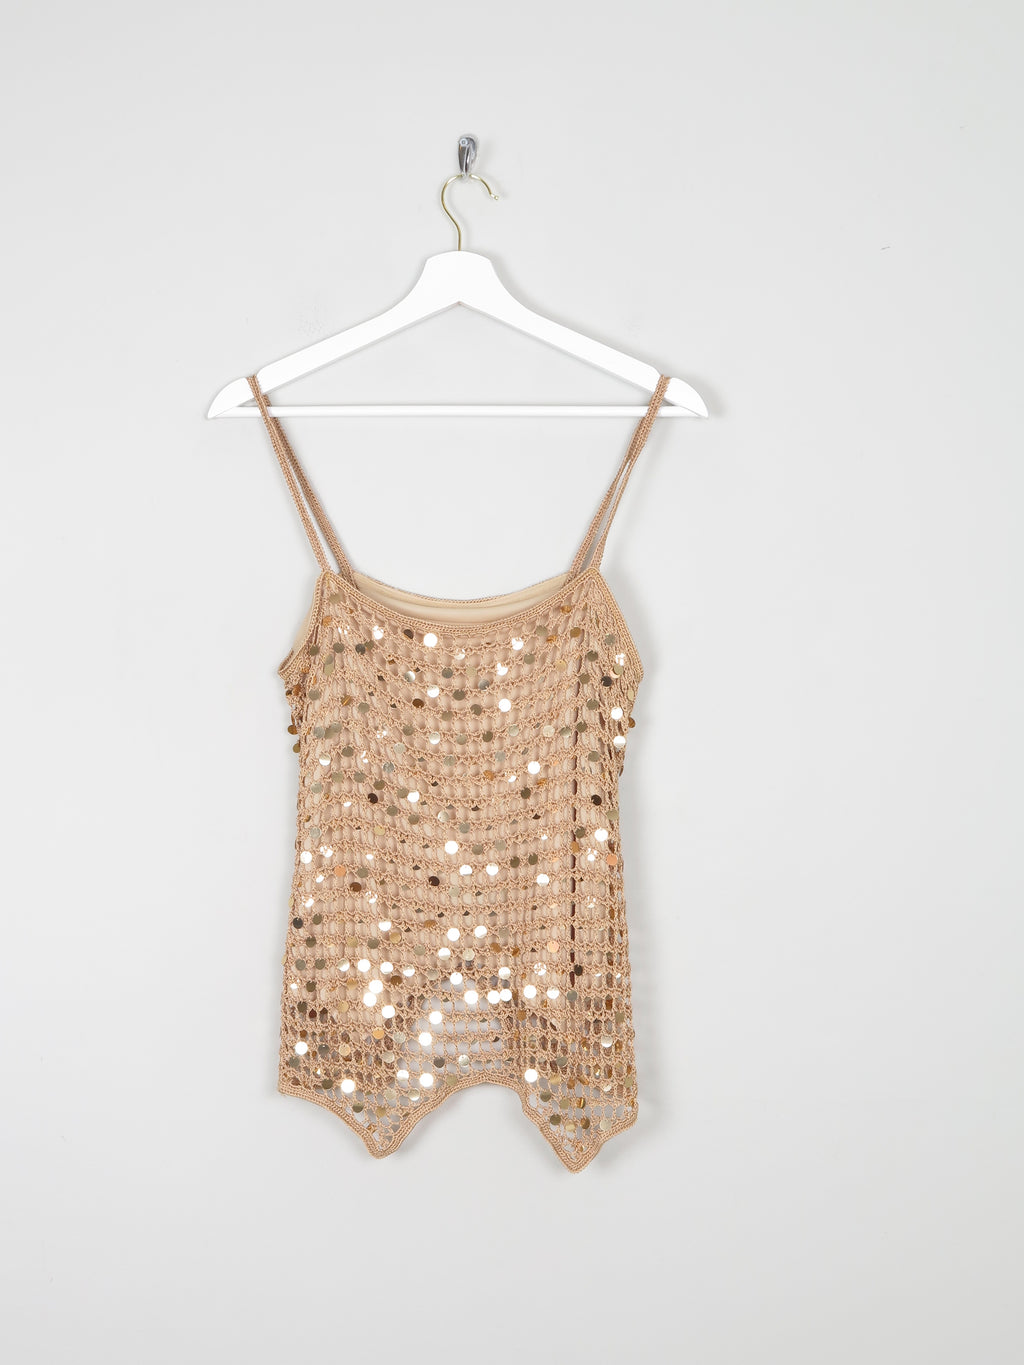 Vintage Gold Crochet & Gold Disc Camisole Top S